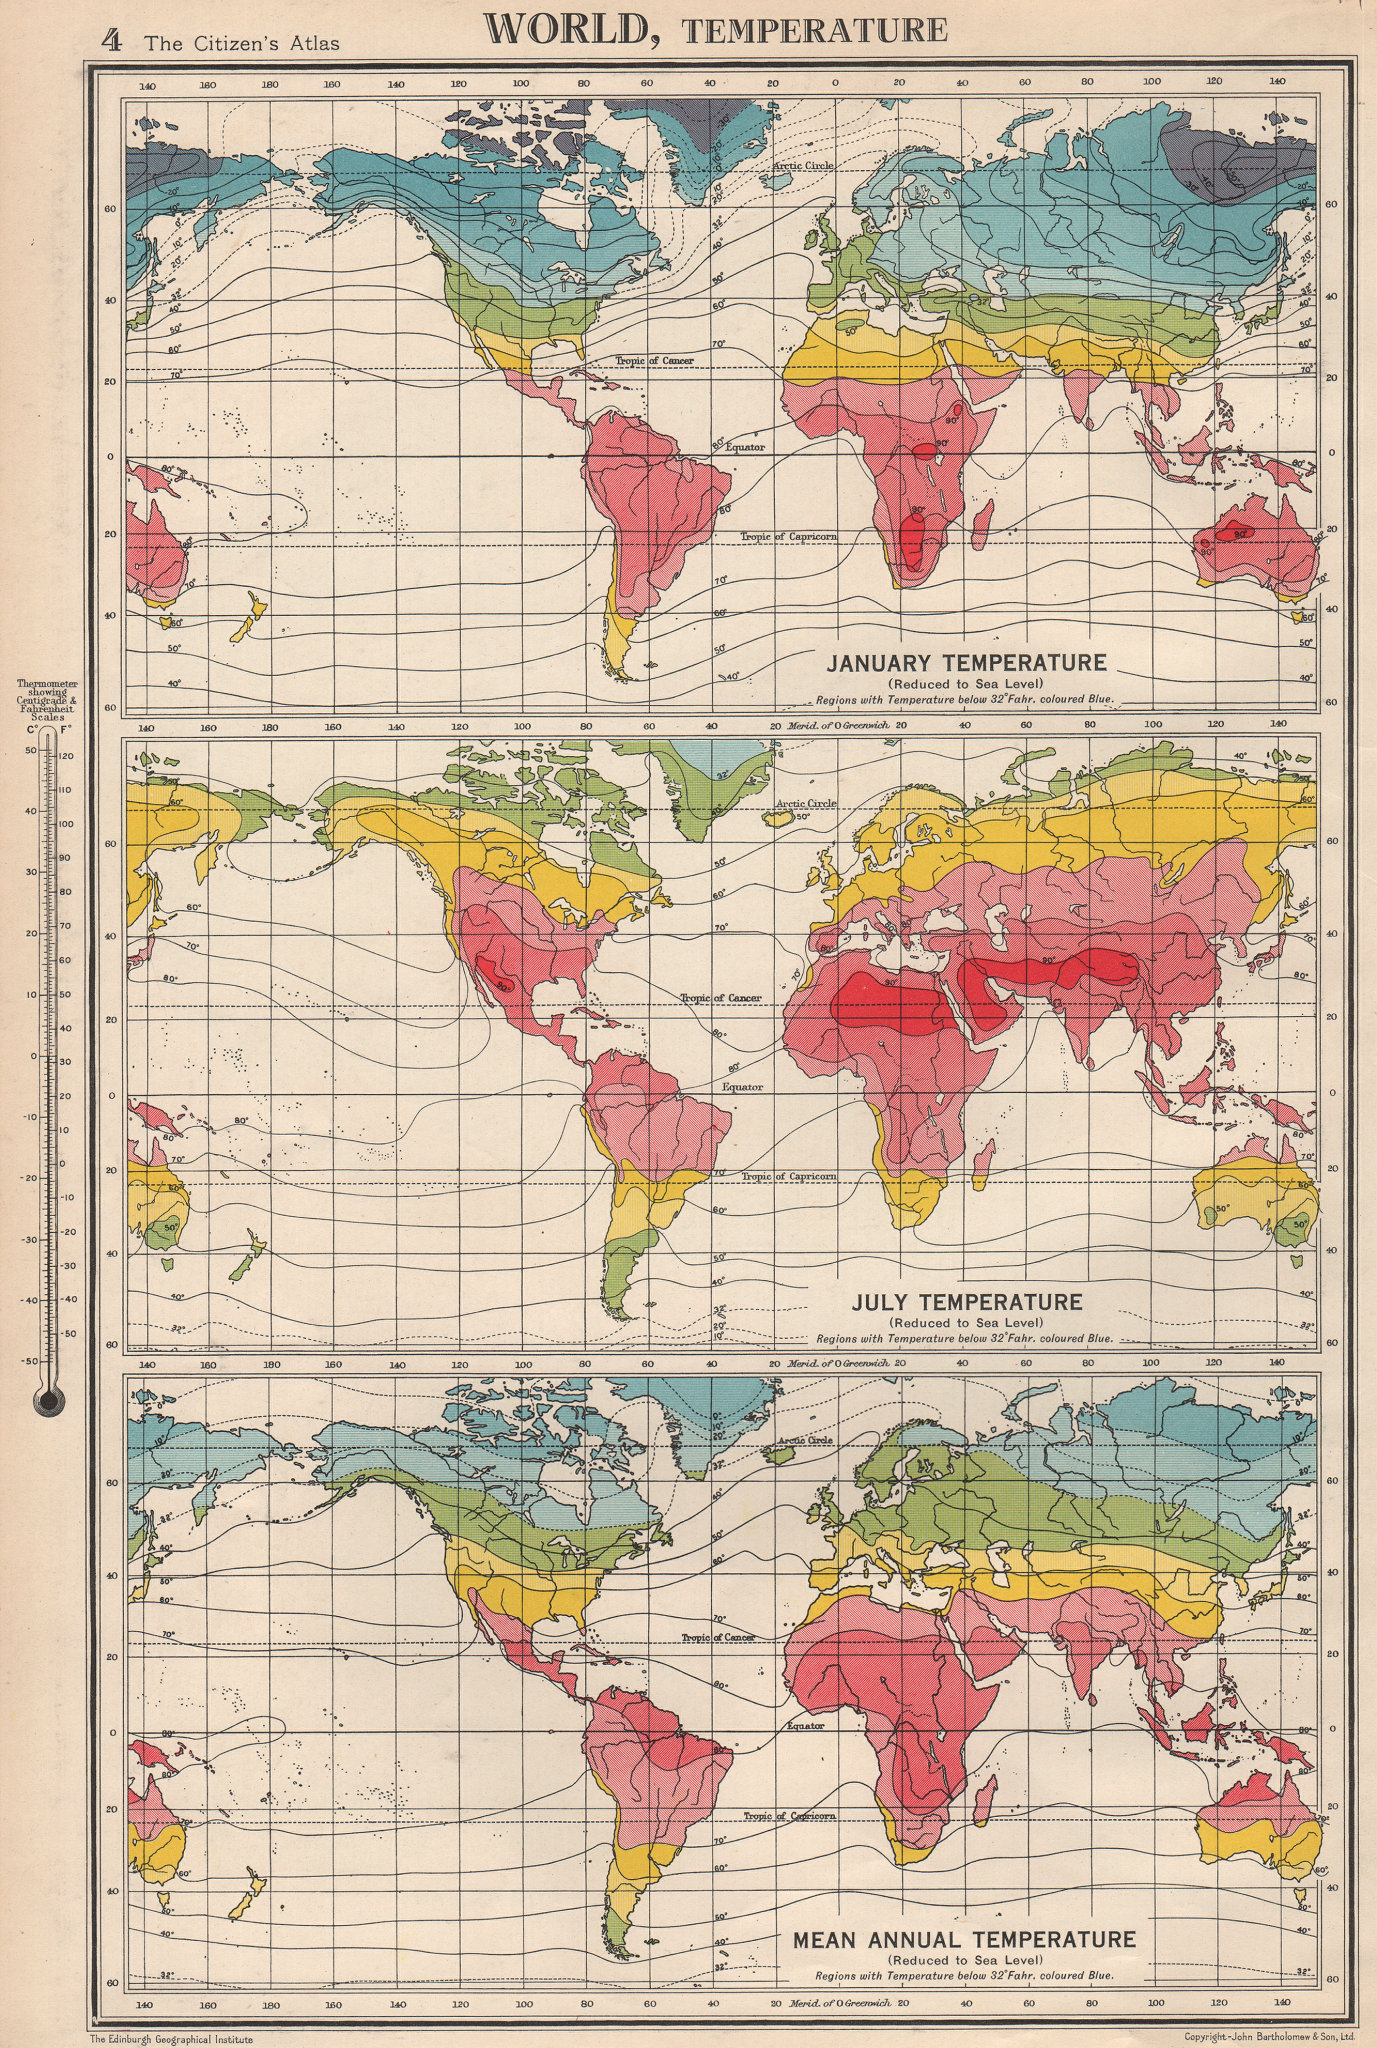 Associate Product WORLD TEMPERATURE. January July Mean annual. BARTHOLOMEW 1952 old vintage map